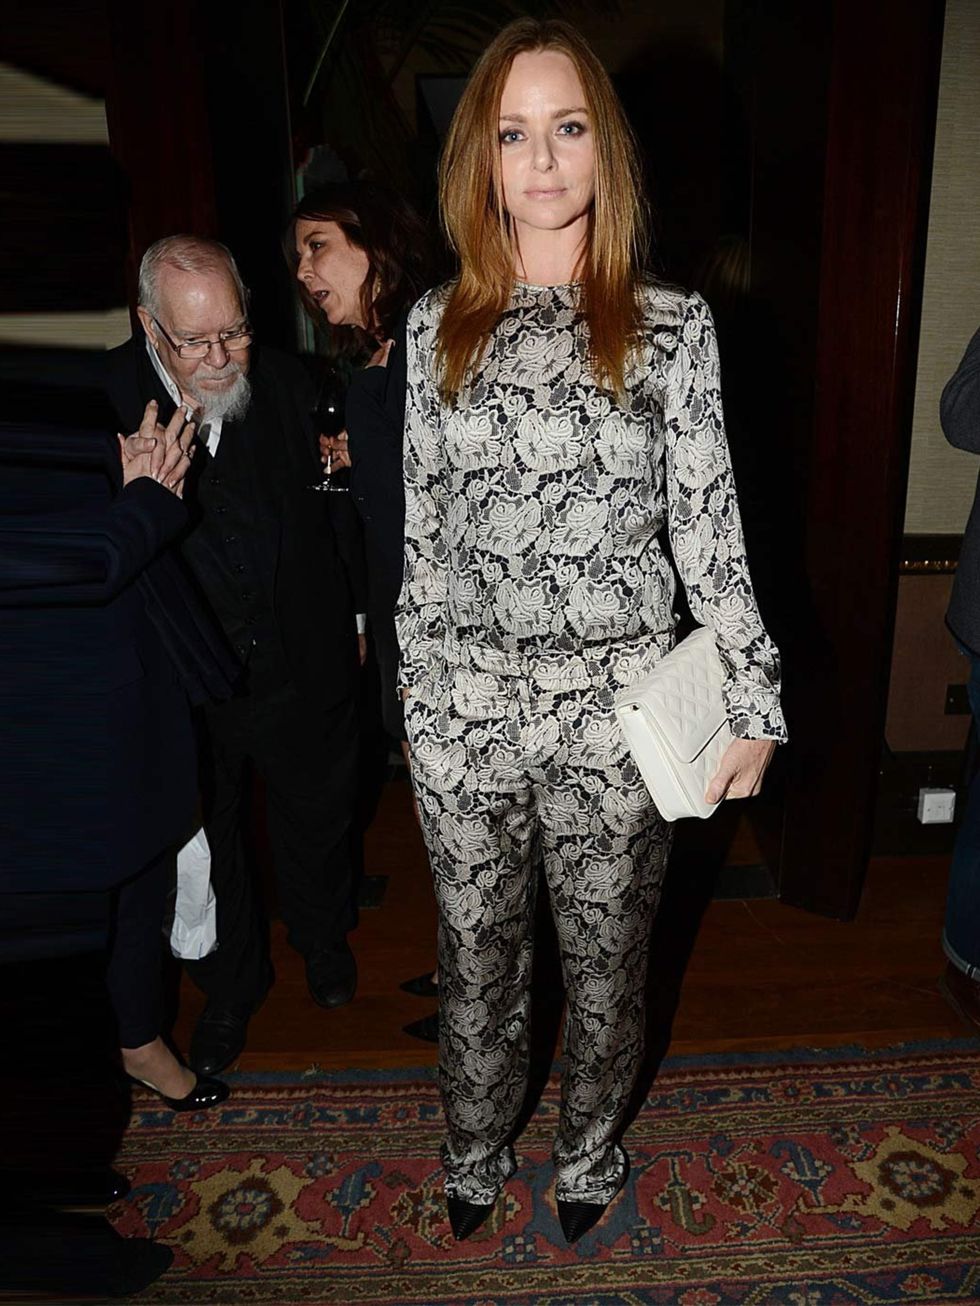 <p>Stella McCartney in a lace Stella McCartney jumpsuit at the 'Kate Moss' book launch after party, London.</p>